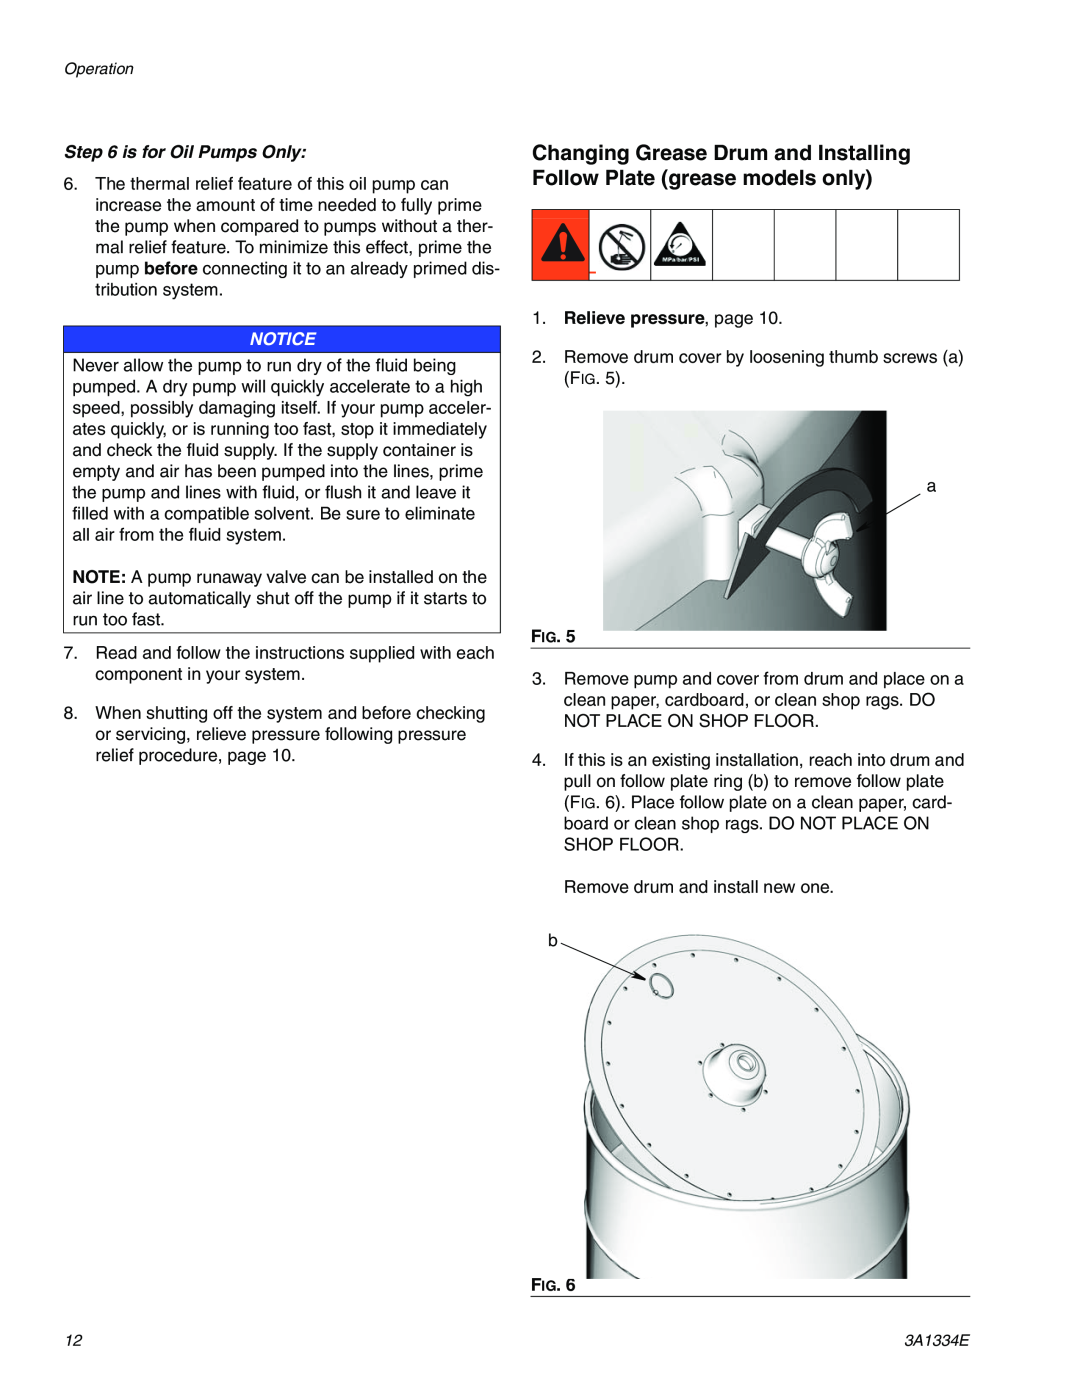 Graco 3A1334E important safety instructions is for Oil Pumps Only, Relieve pressure, page 